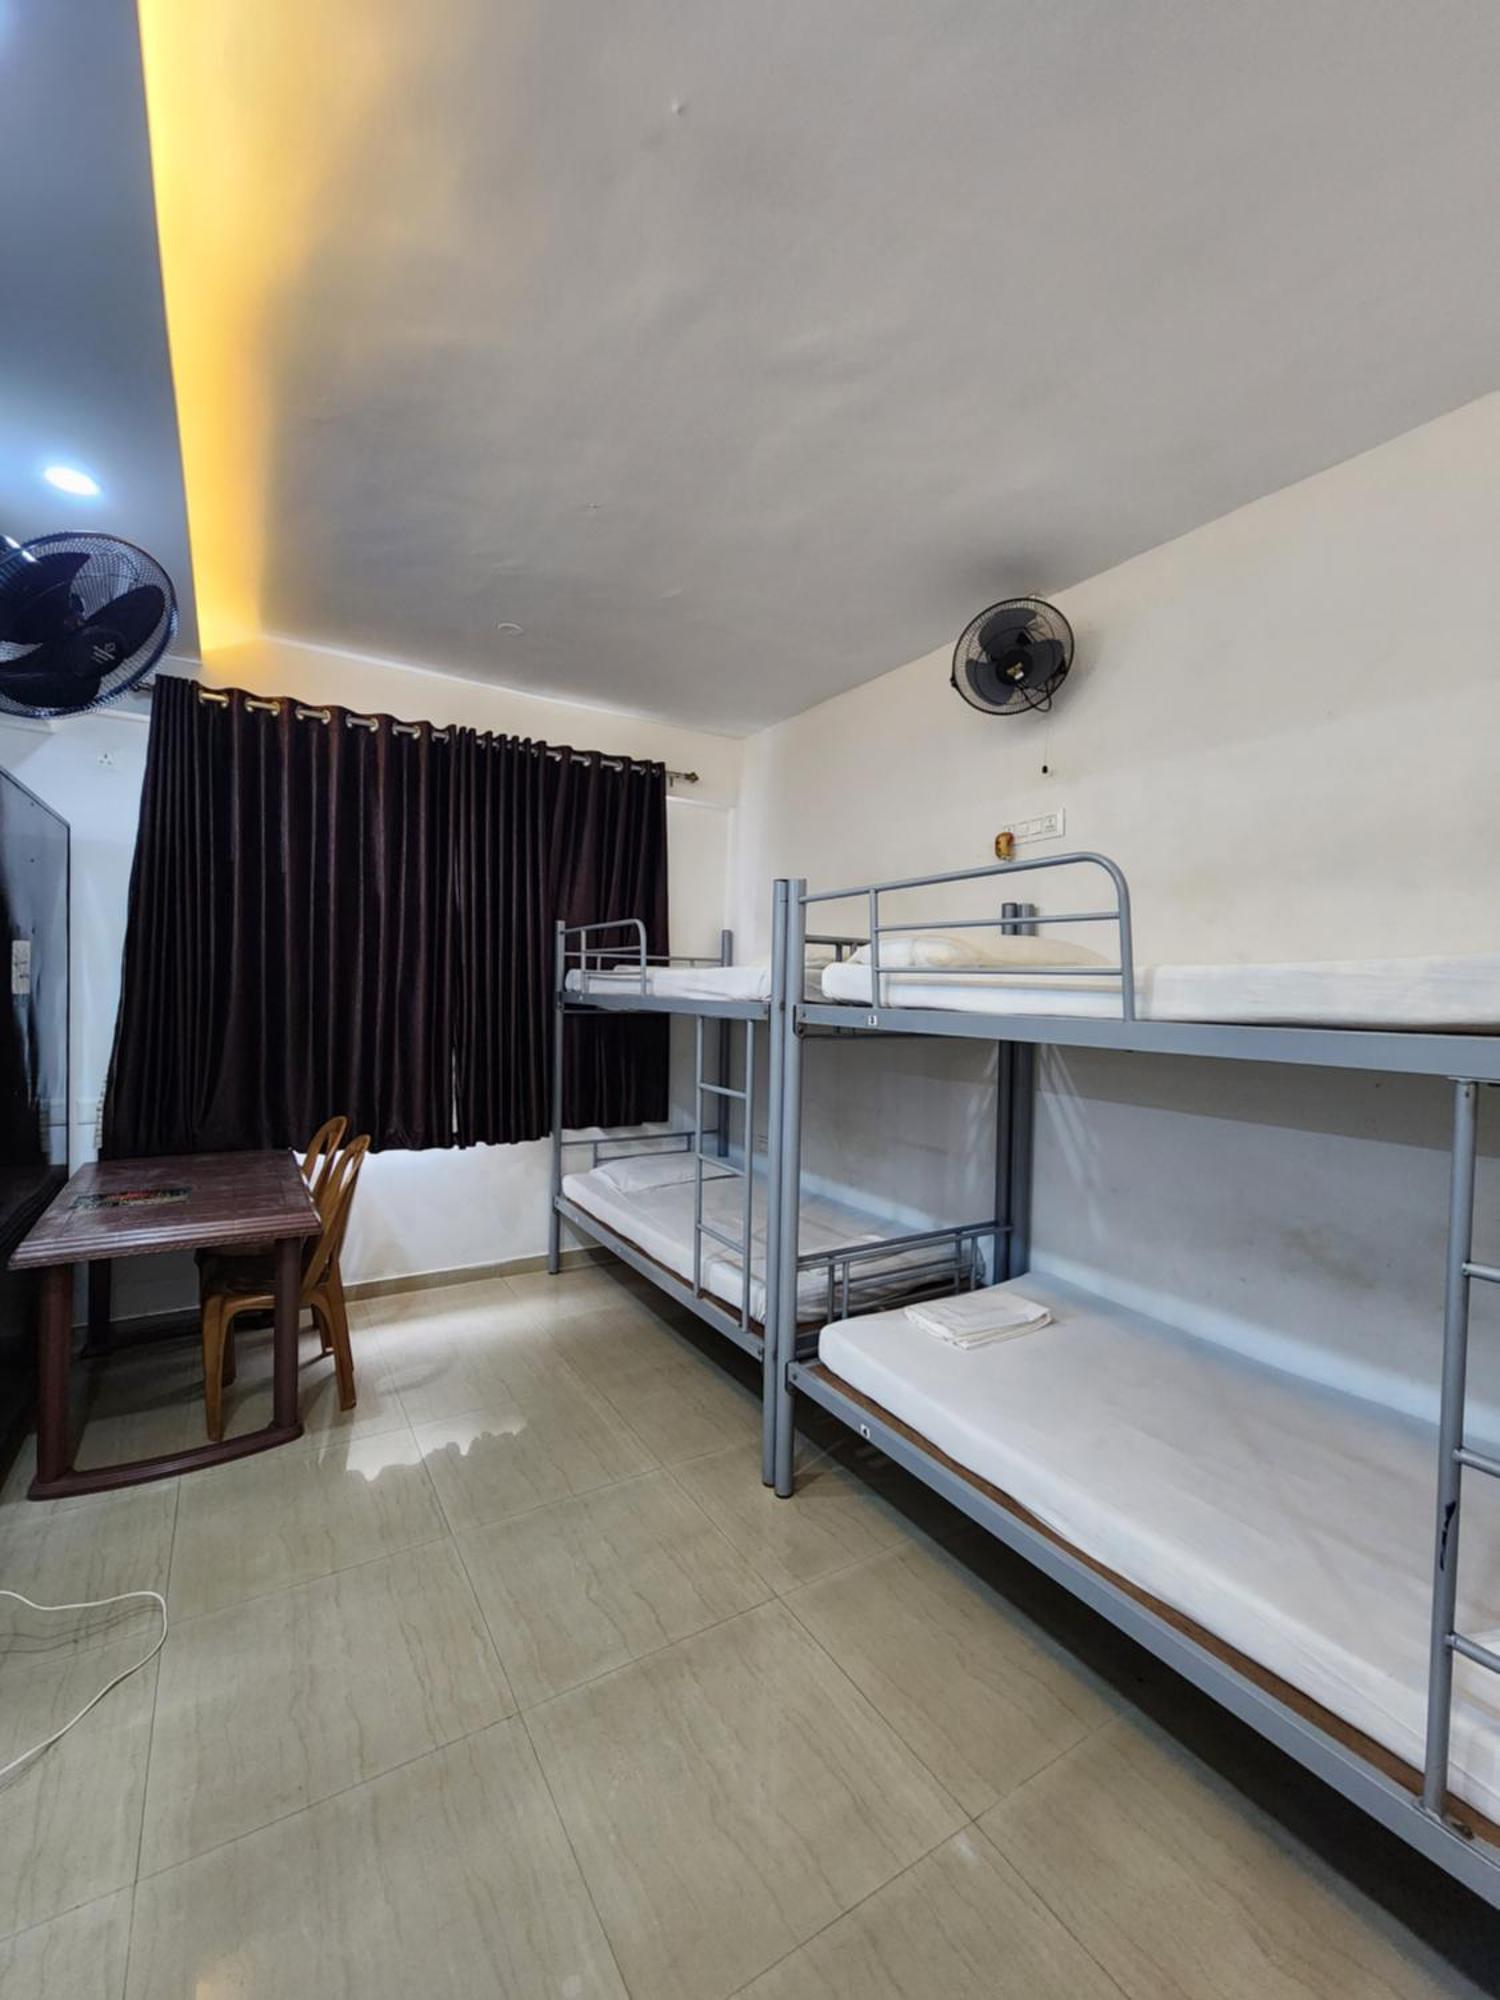 All Seasons Guest House I Rooms & Dorms Madgao Buitenkant foto